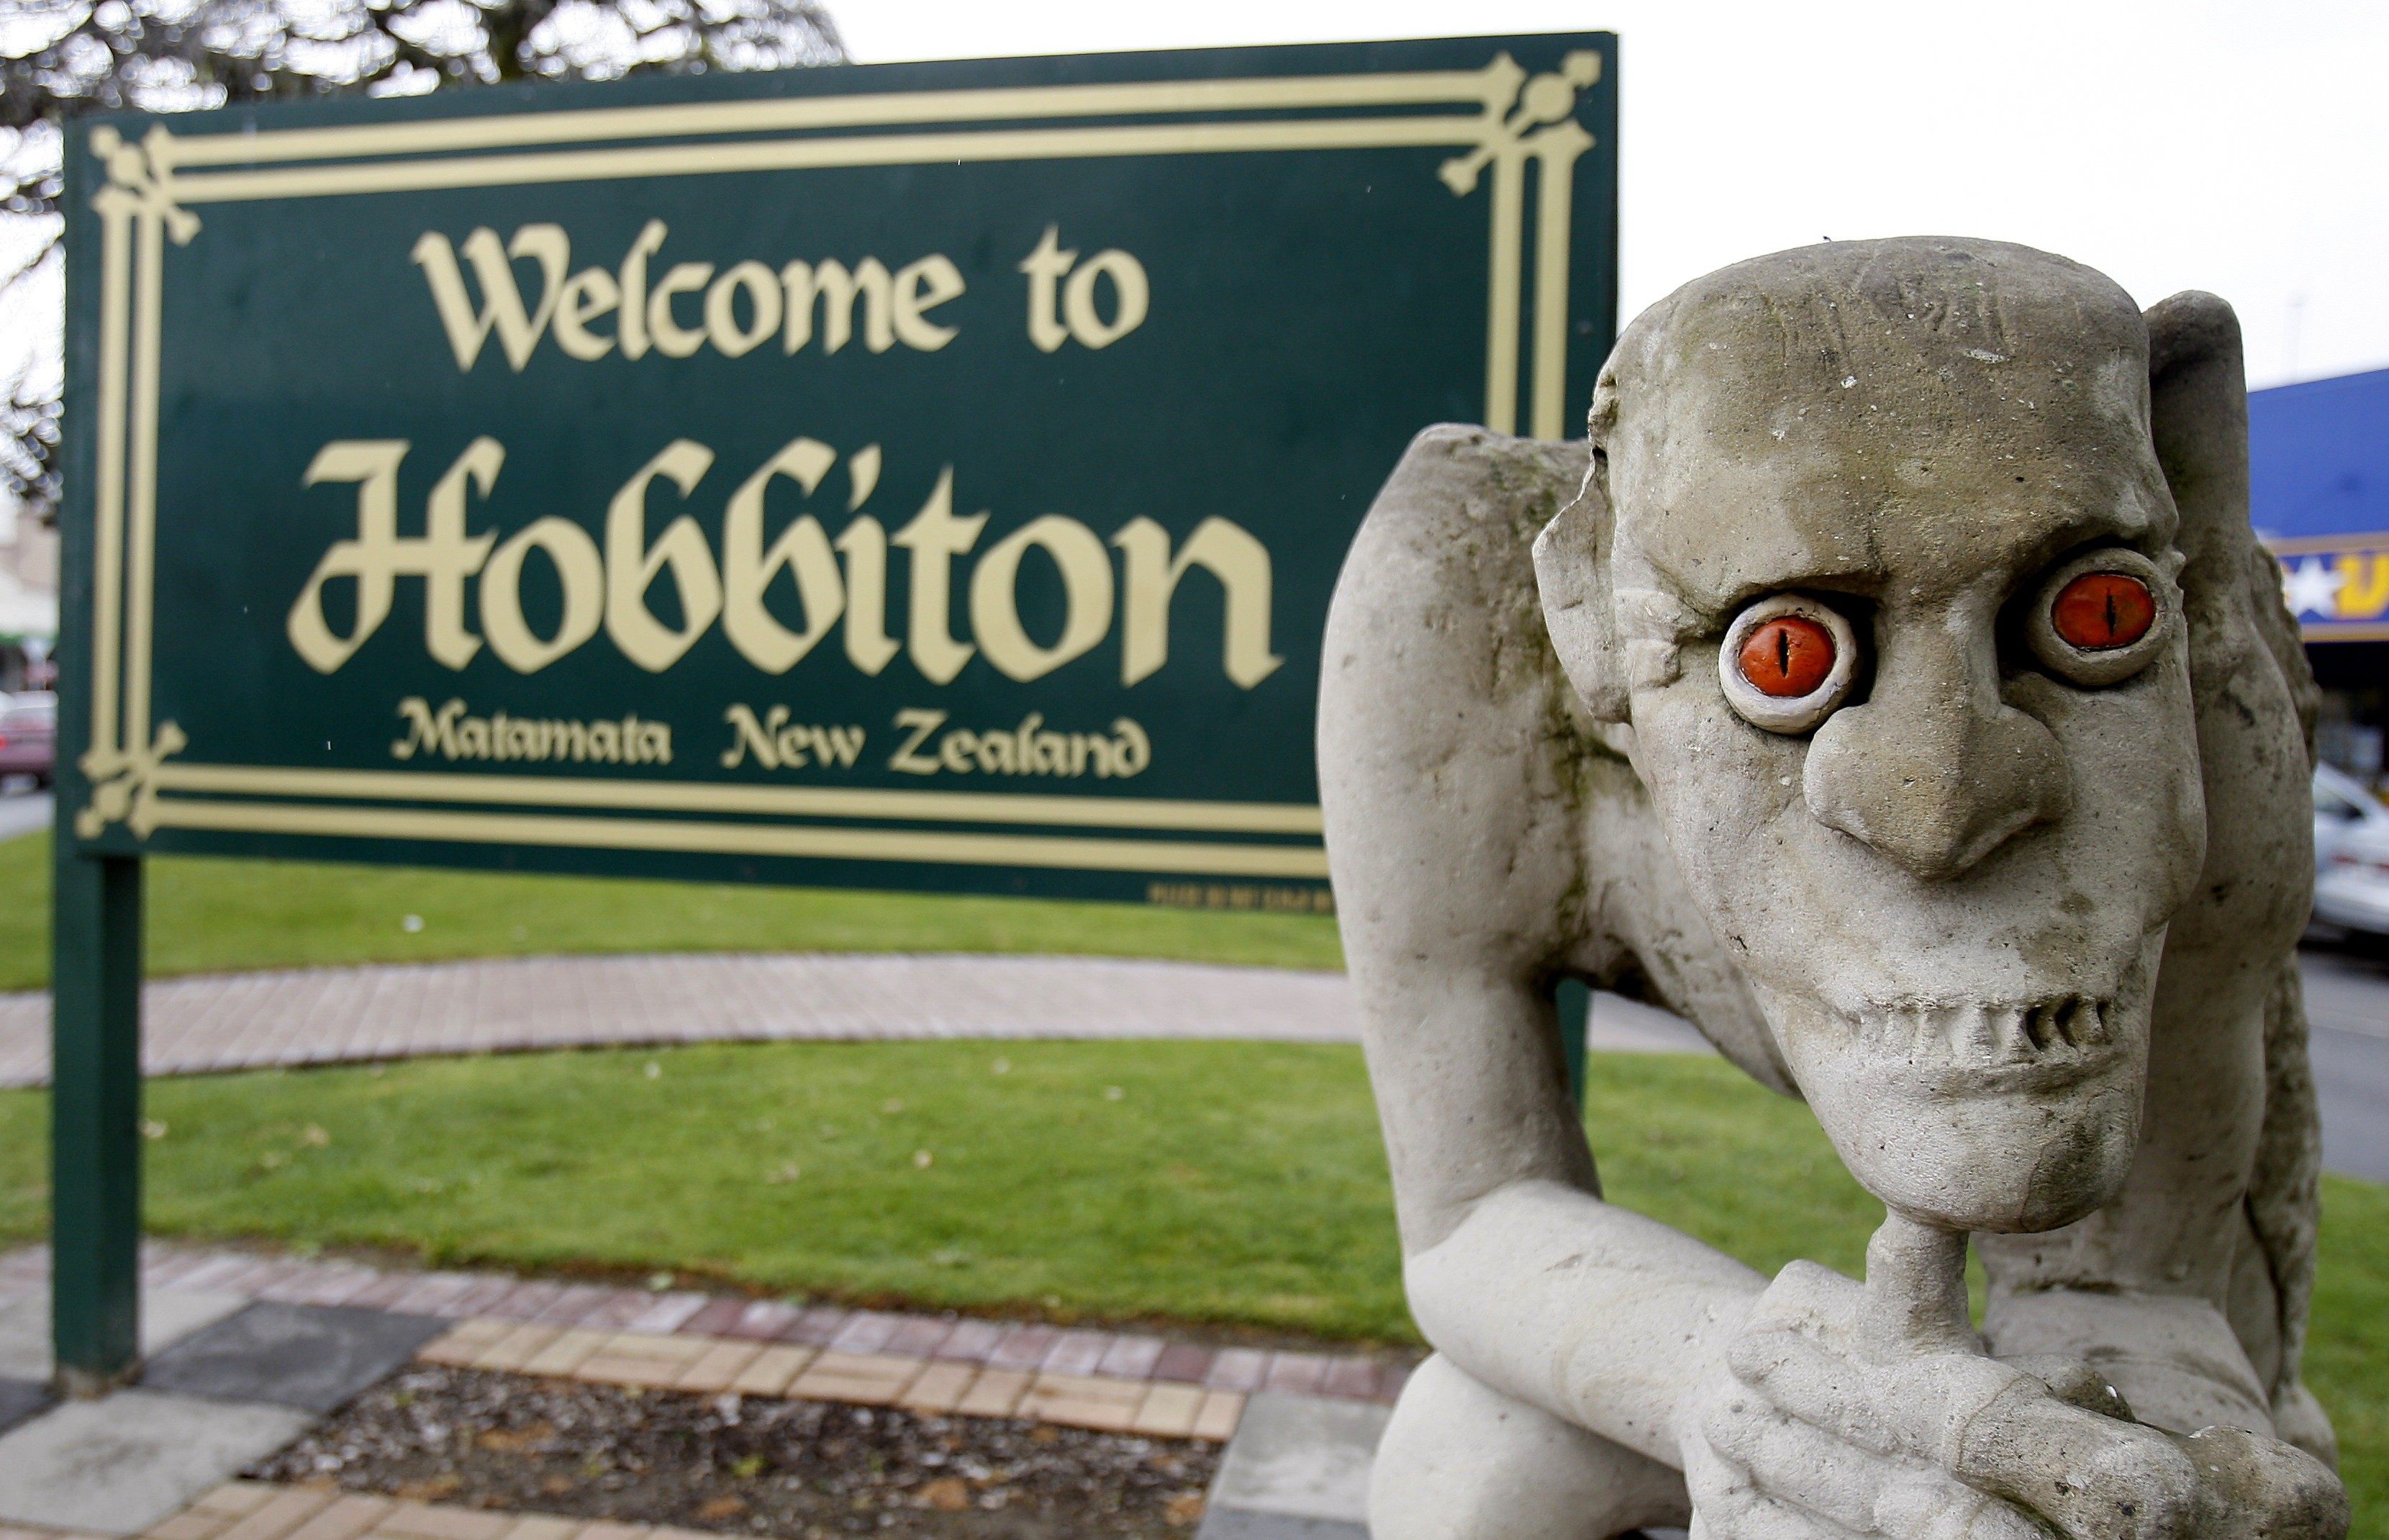 A sculpture of Gollum, the villainous “Lord of the Rings” hobbit, stands in front of a welcome sign in Hobbiton Town, Matamata, New Zealand. Photo: AP